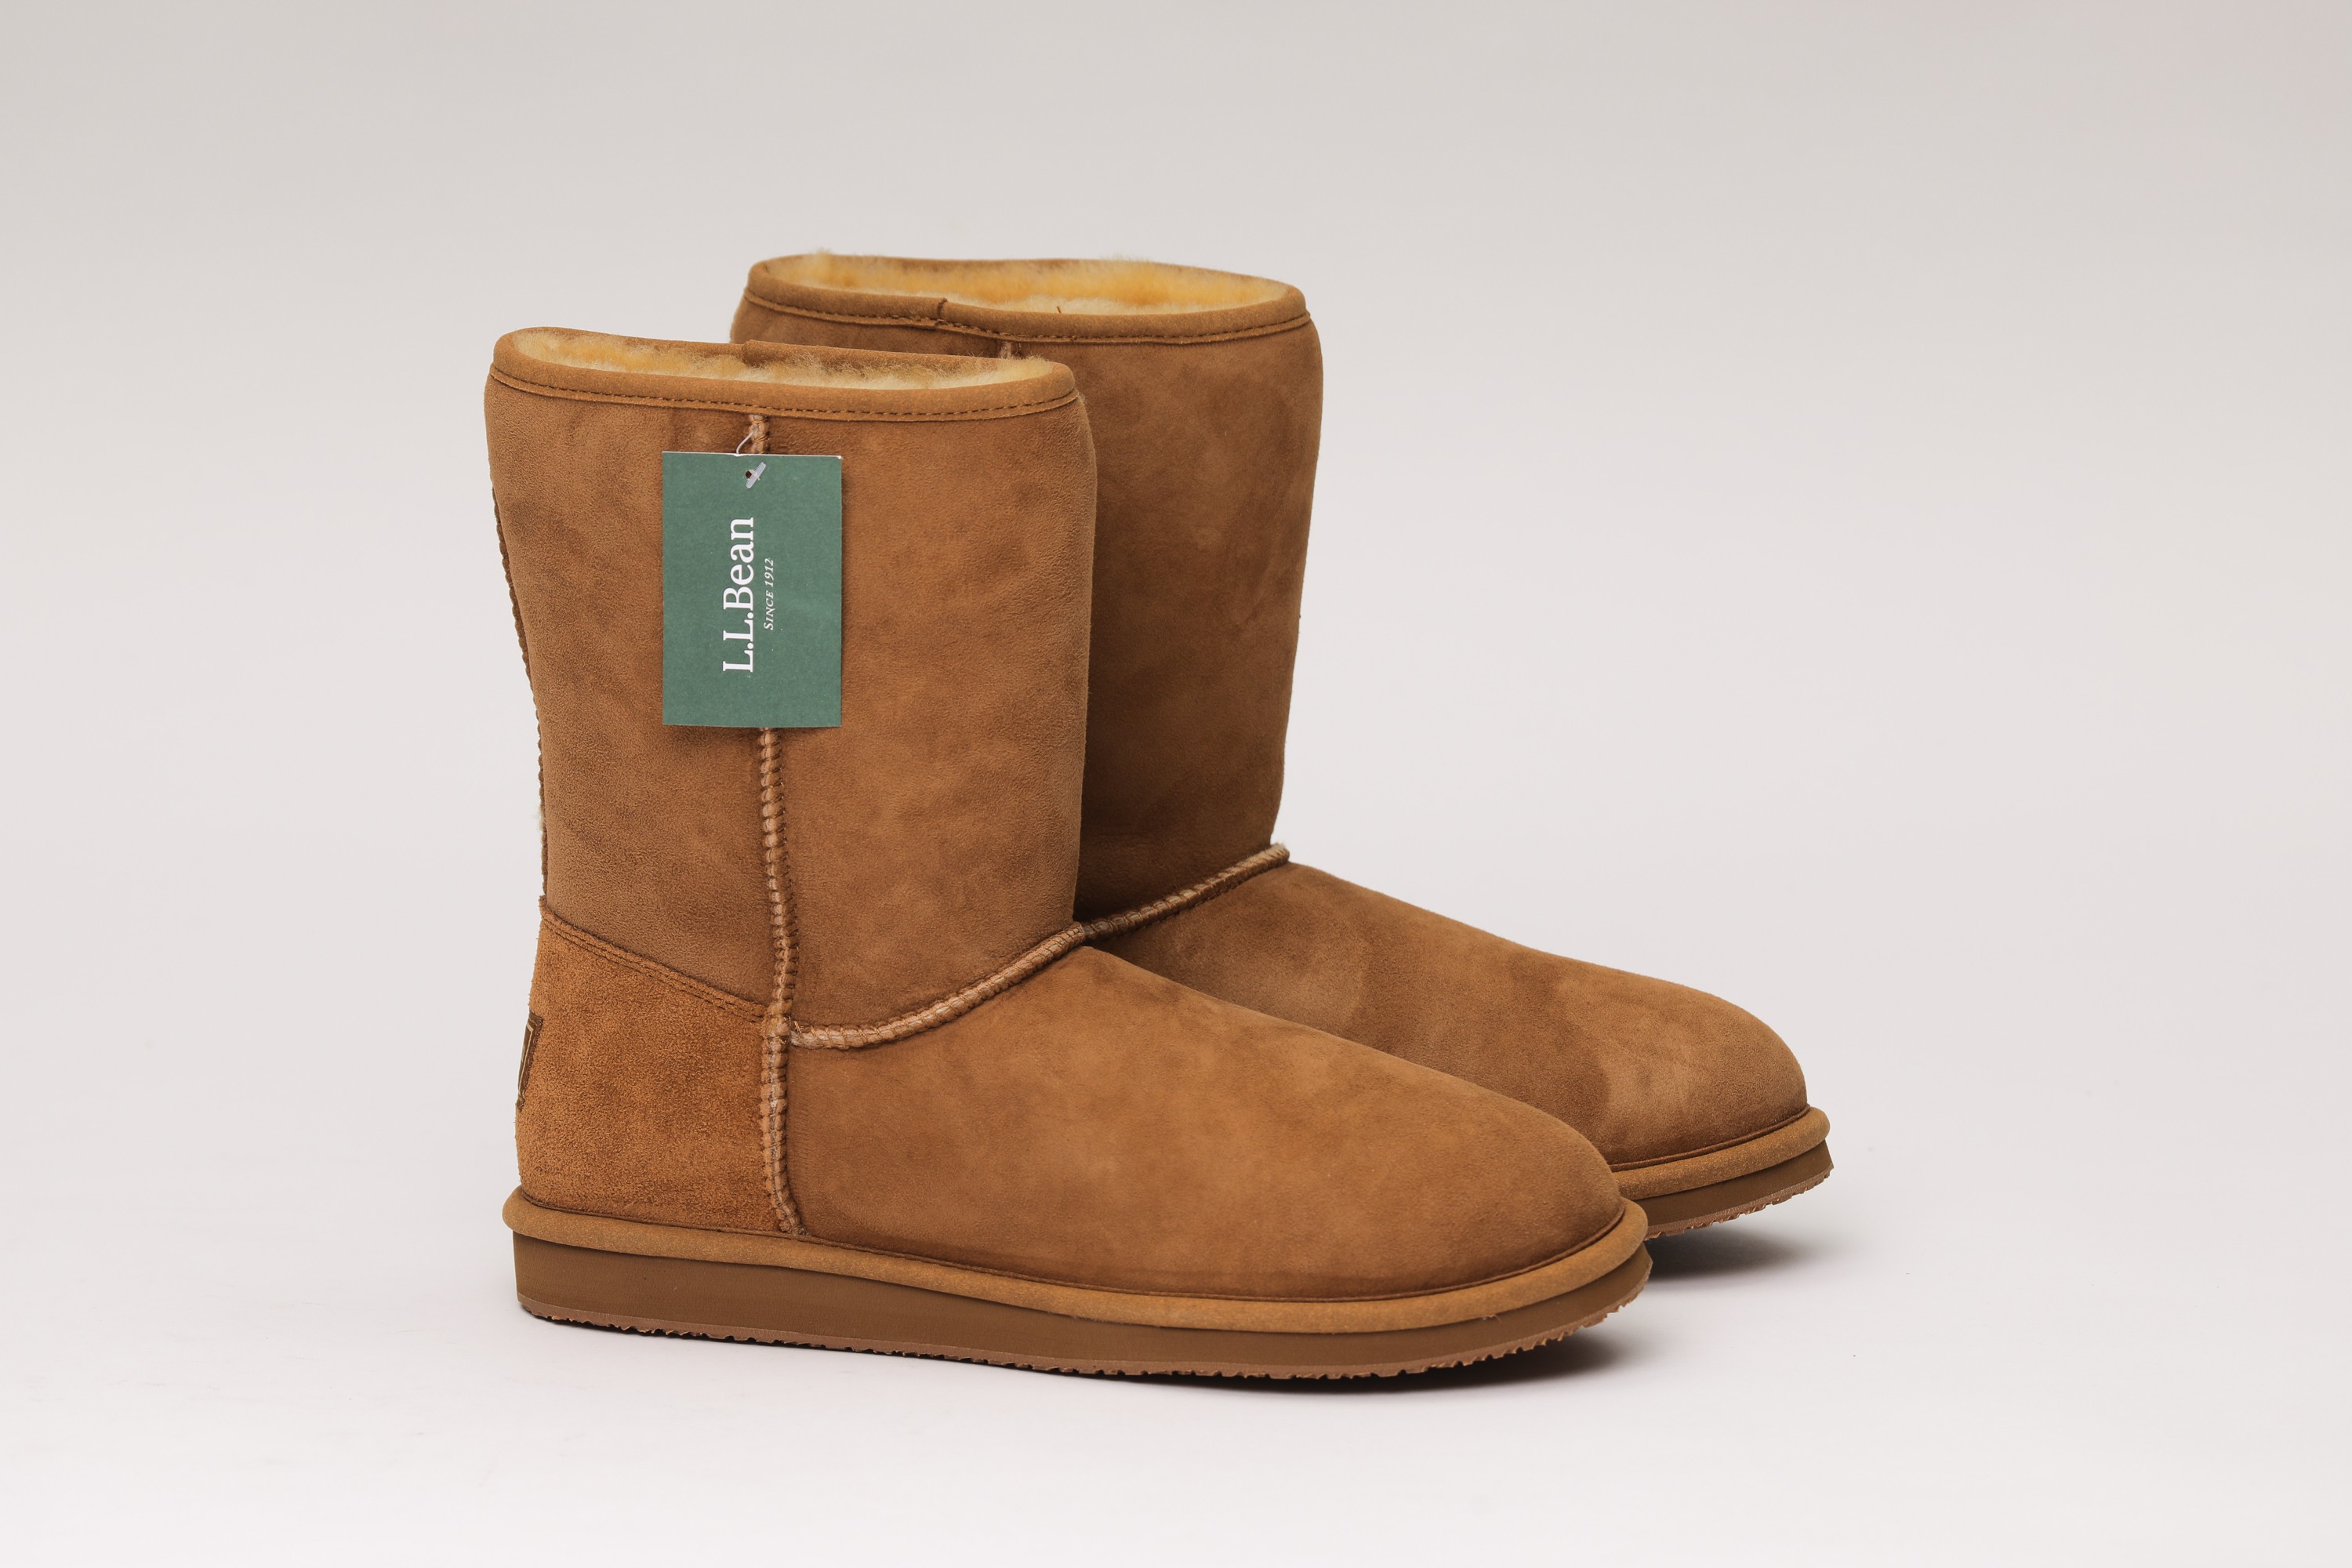 ll bean wicked good shearling boots